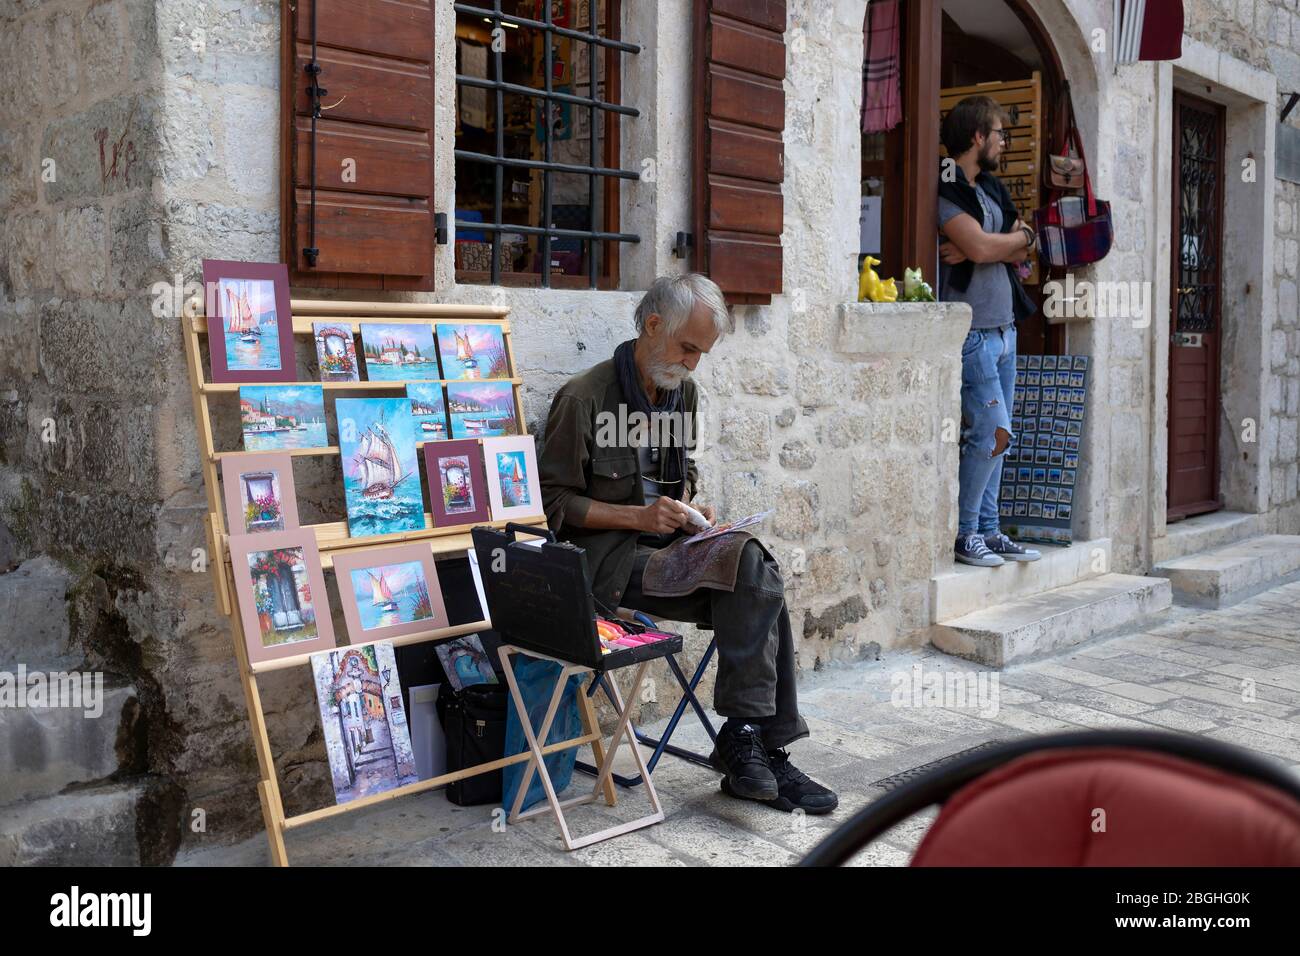 Montenegro, Sep 17, 2018: An artist sits next to his paintings displayed on the street of Kotor Old Town Stock Photo